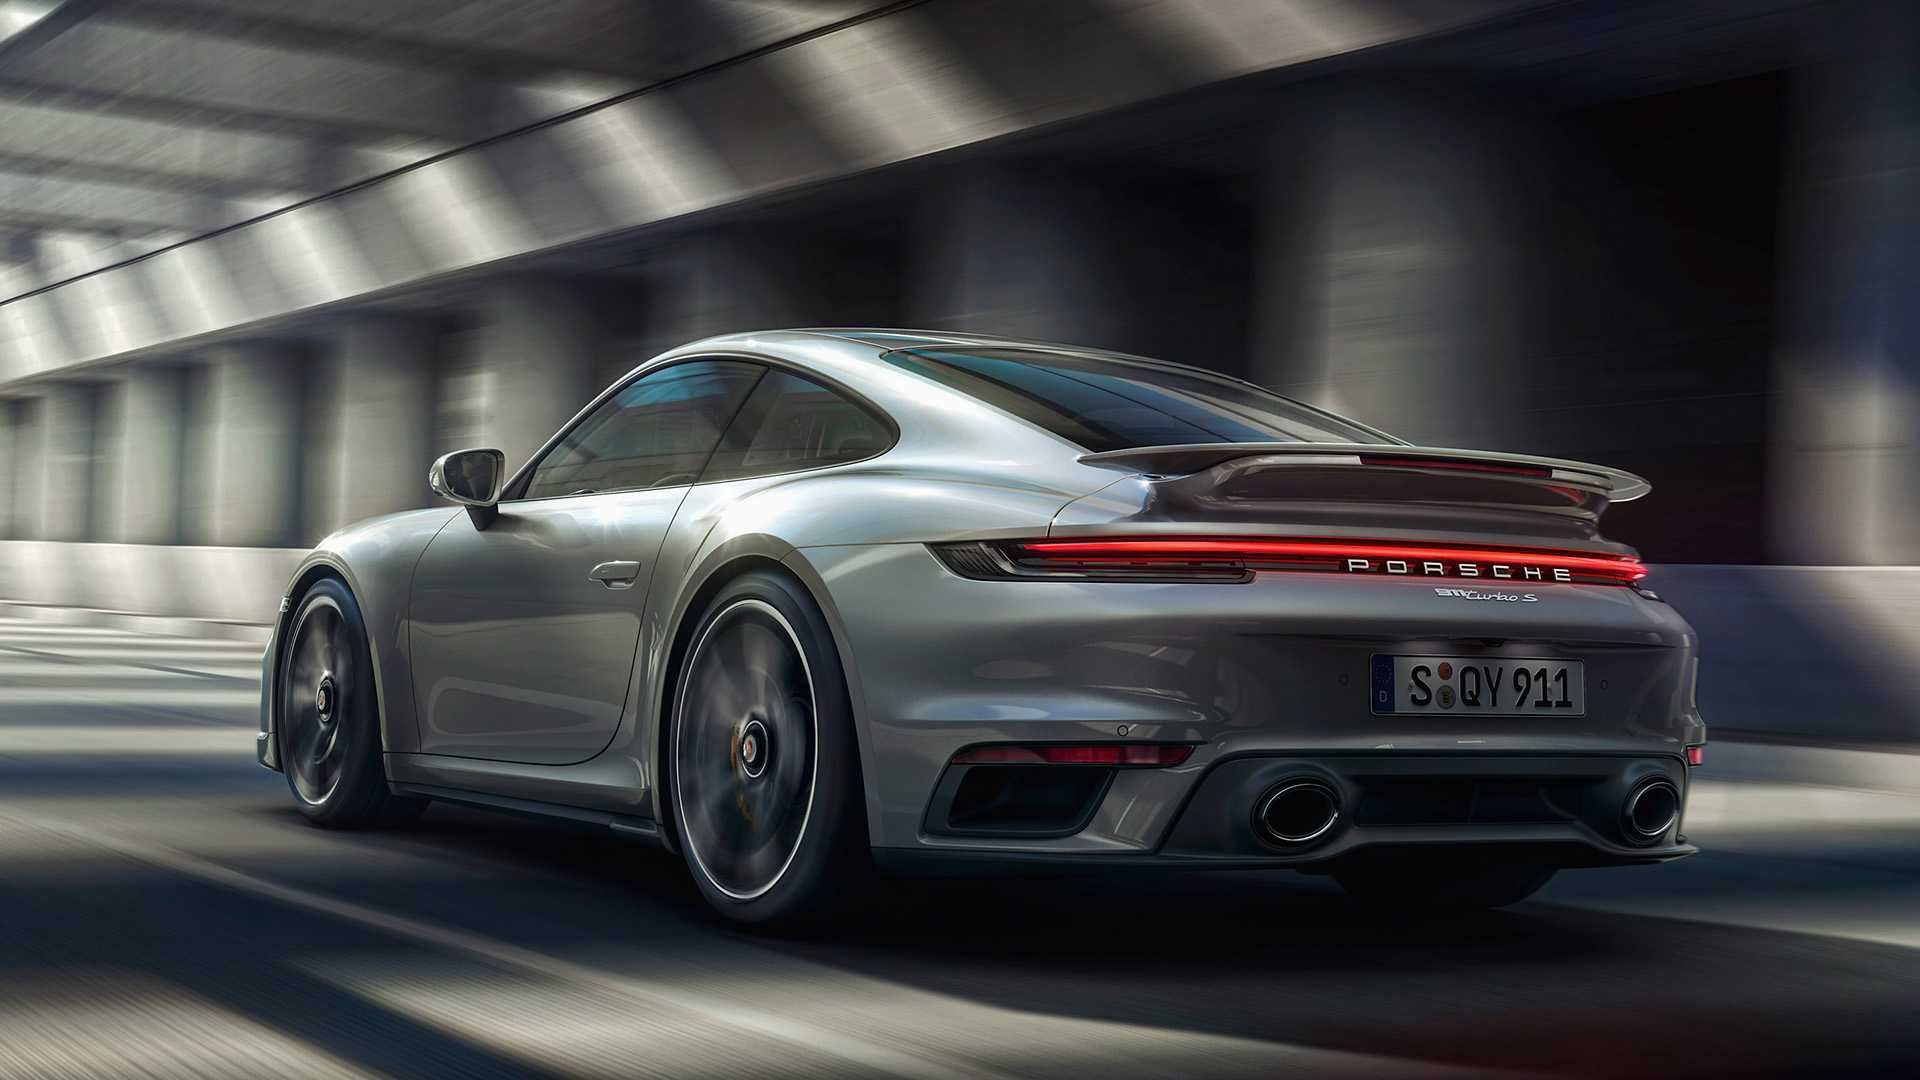 2021 Porsche 911 Turbo S, silver greay, front, driving on the motorway, rear, Porsche